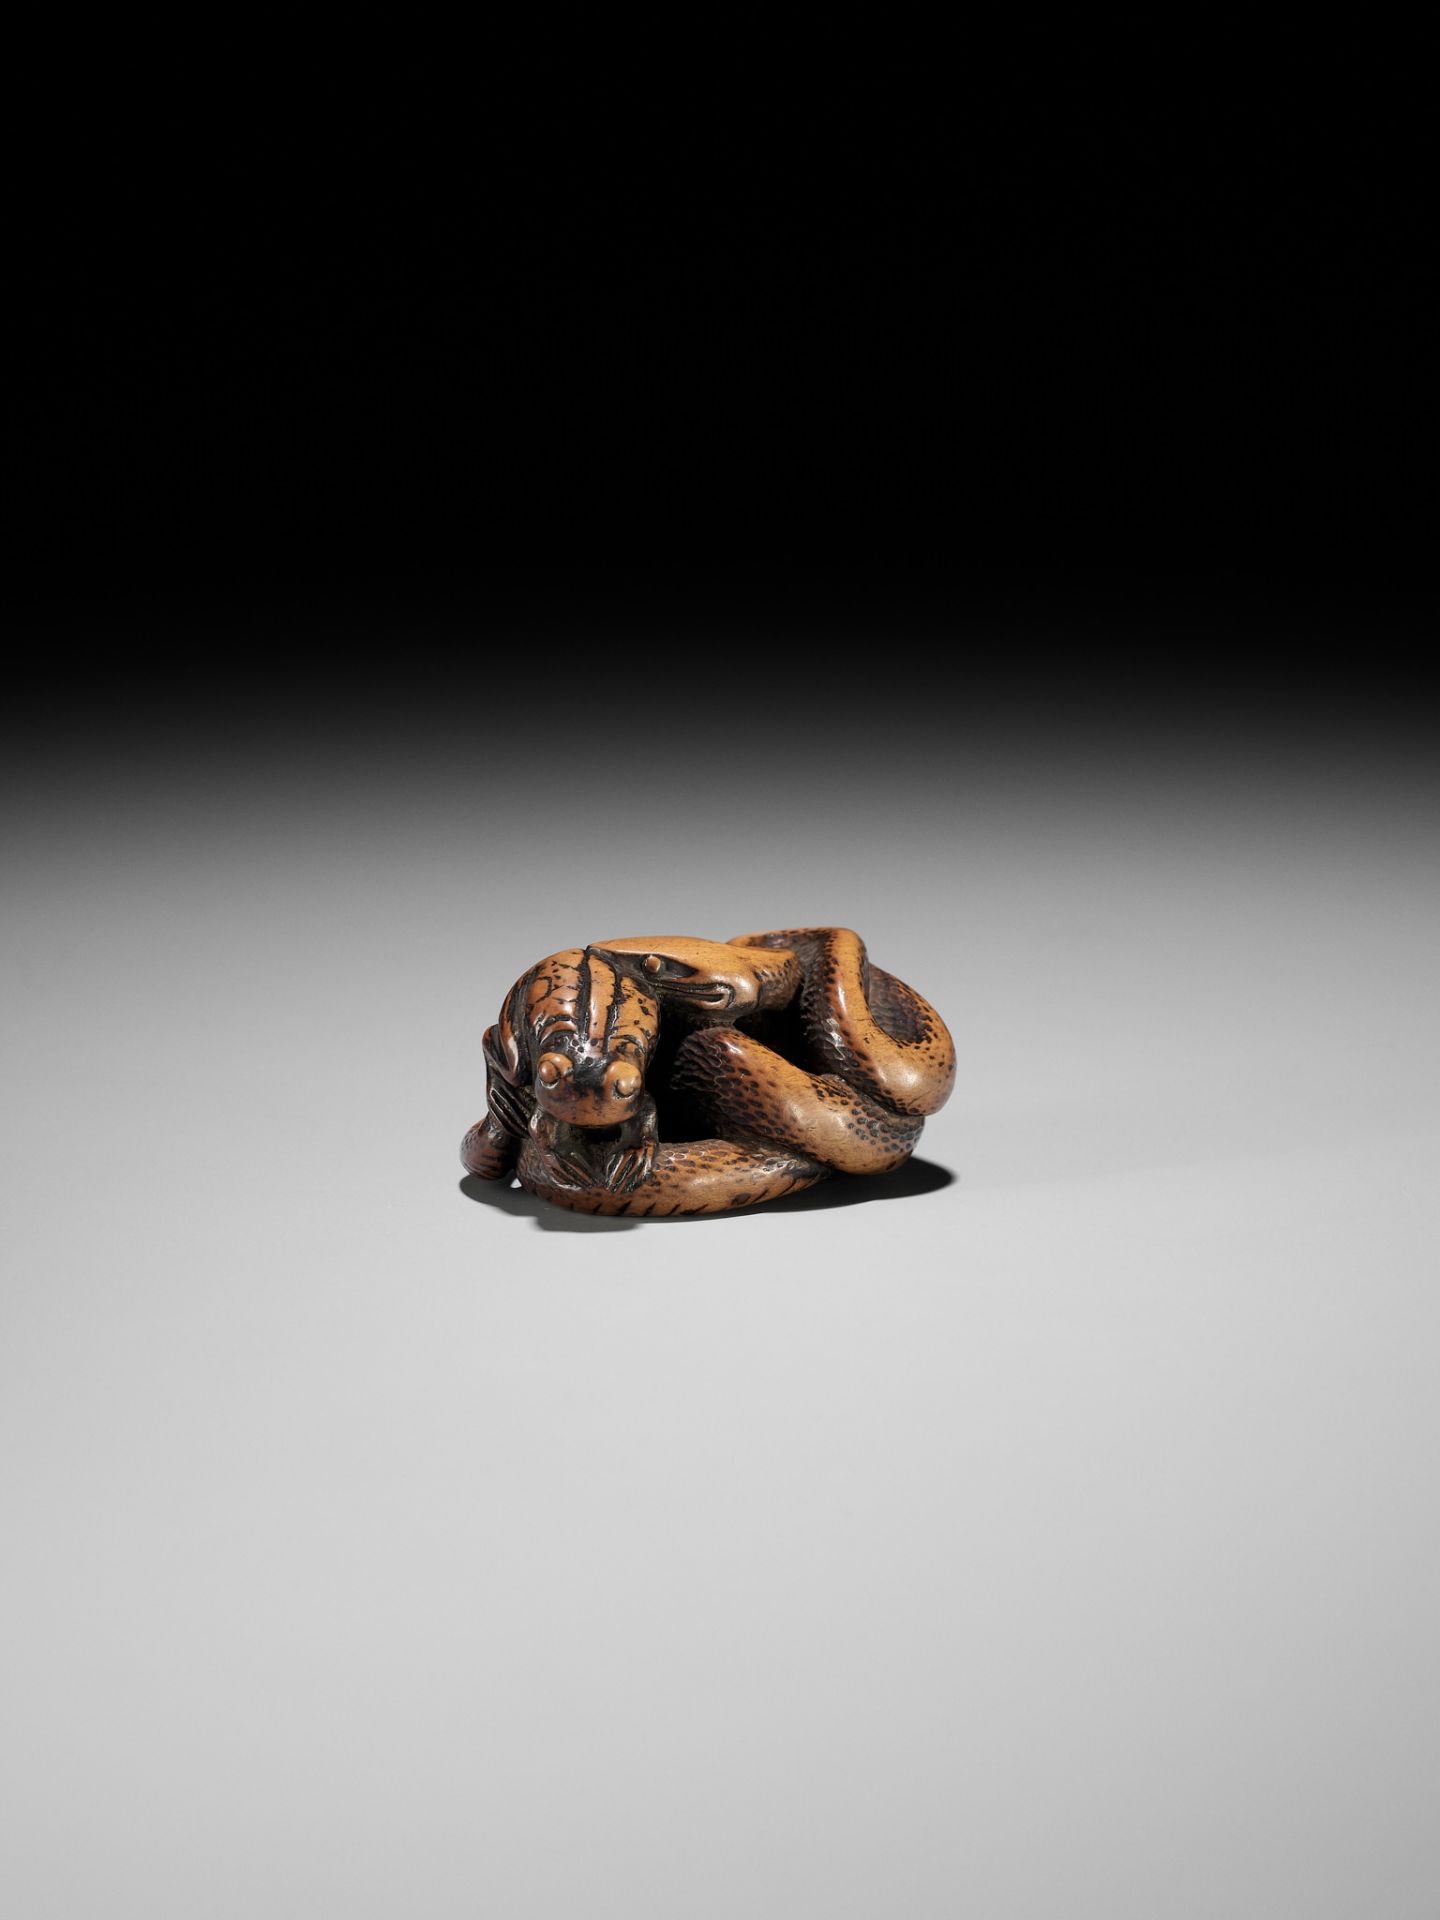 AN EARLY WOOD NETSUKE OF A SNAKE AND FROG - Image 12 of 12